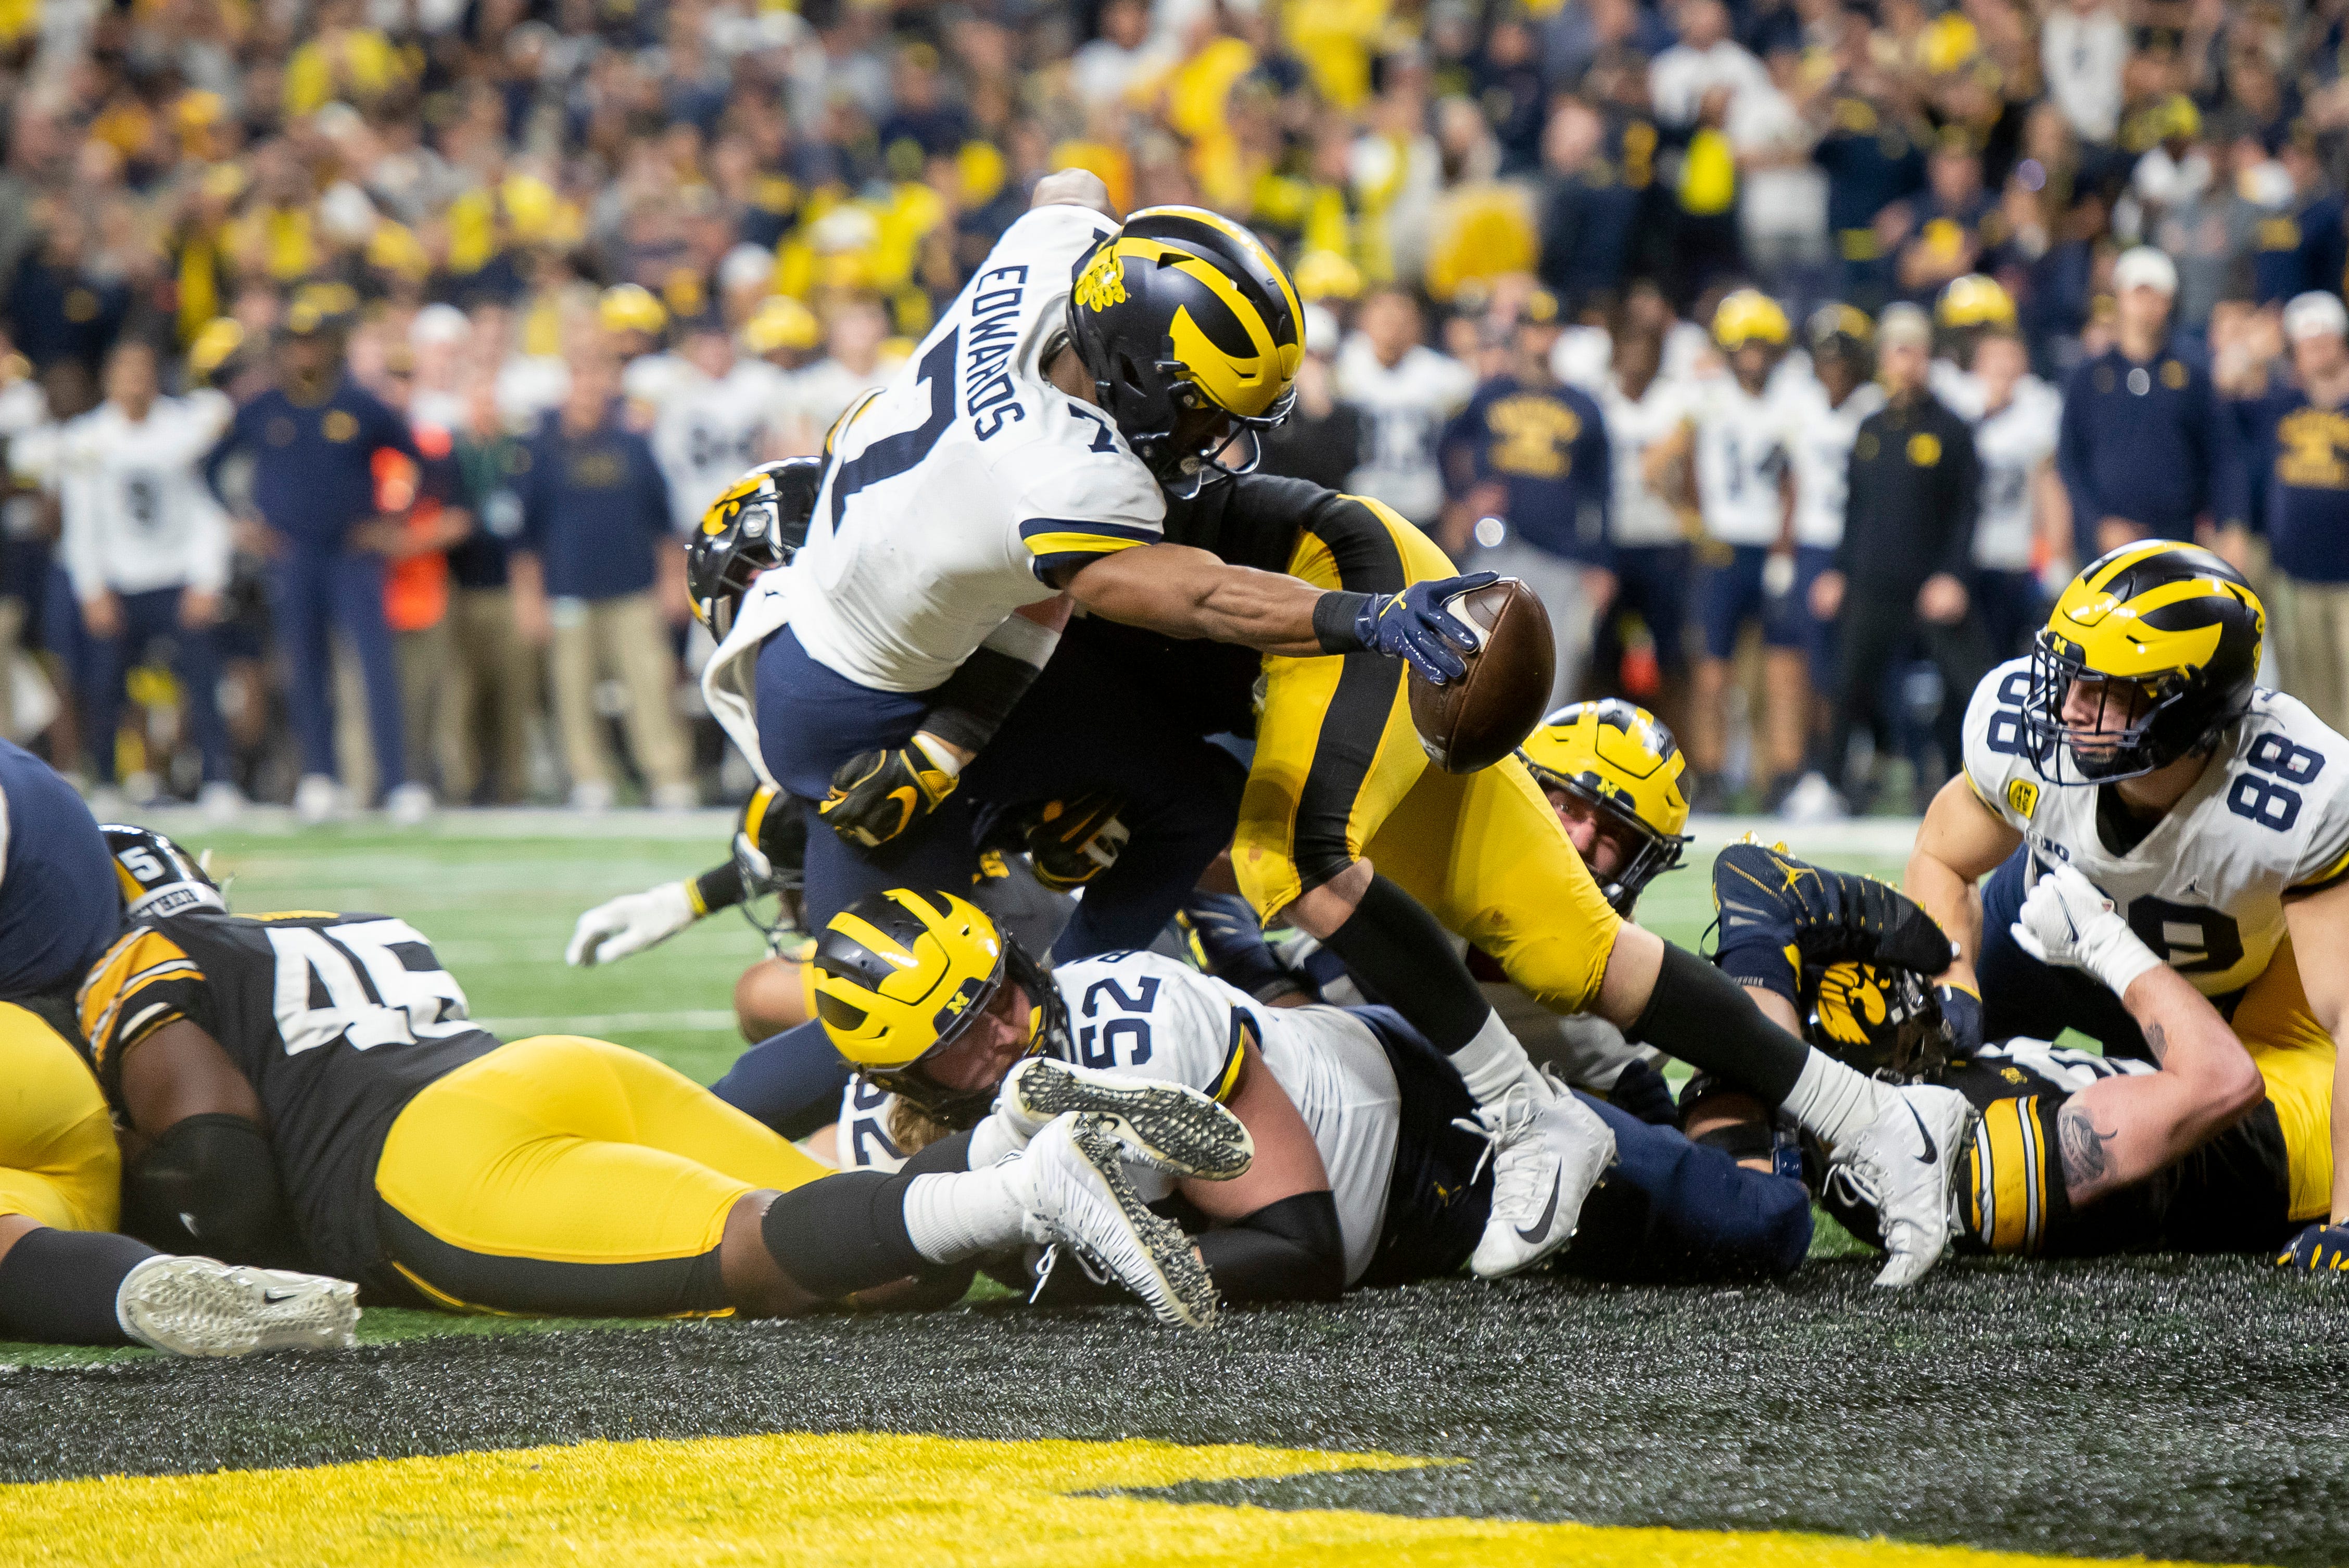 Michigan running back Donovan Edwards reaches across the goal line for a touchdown during the fourth quarter.